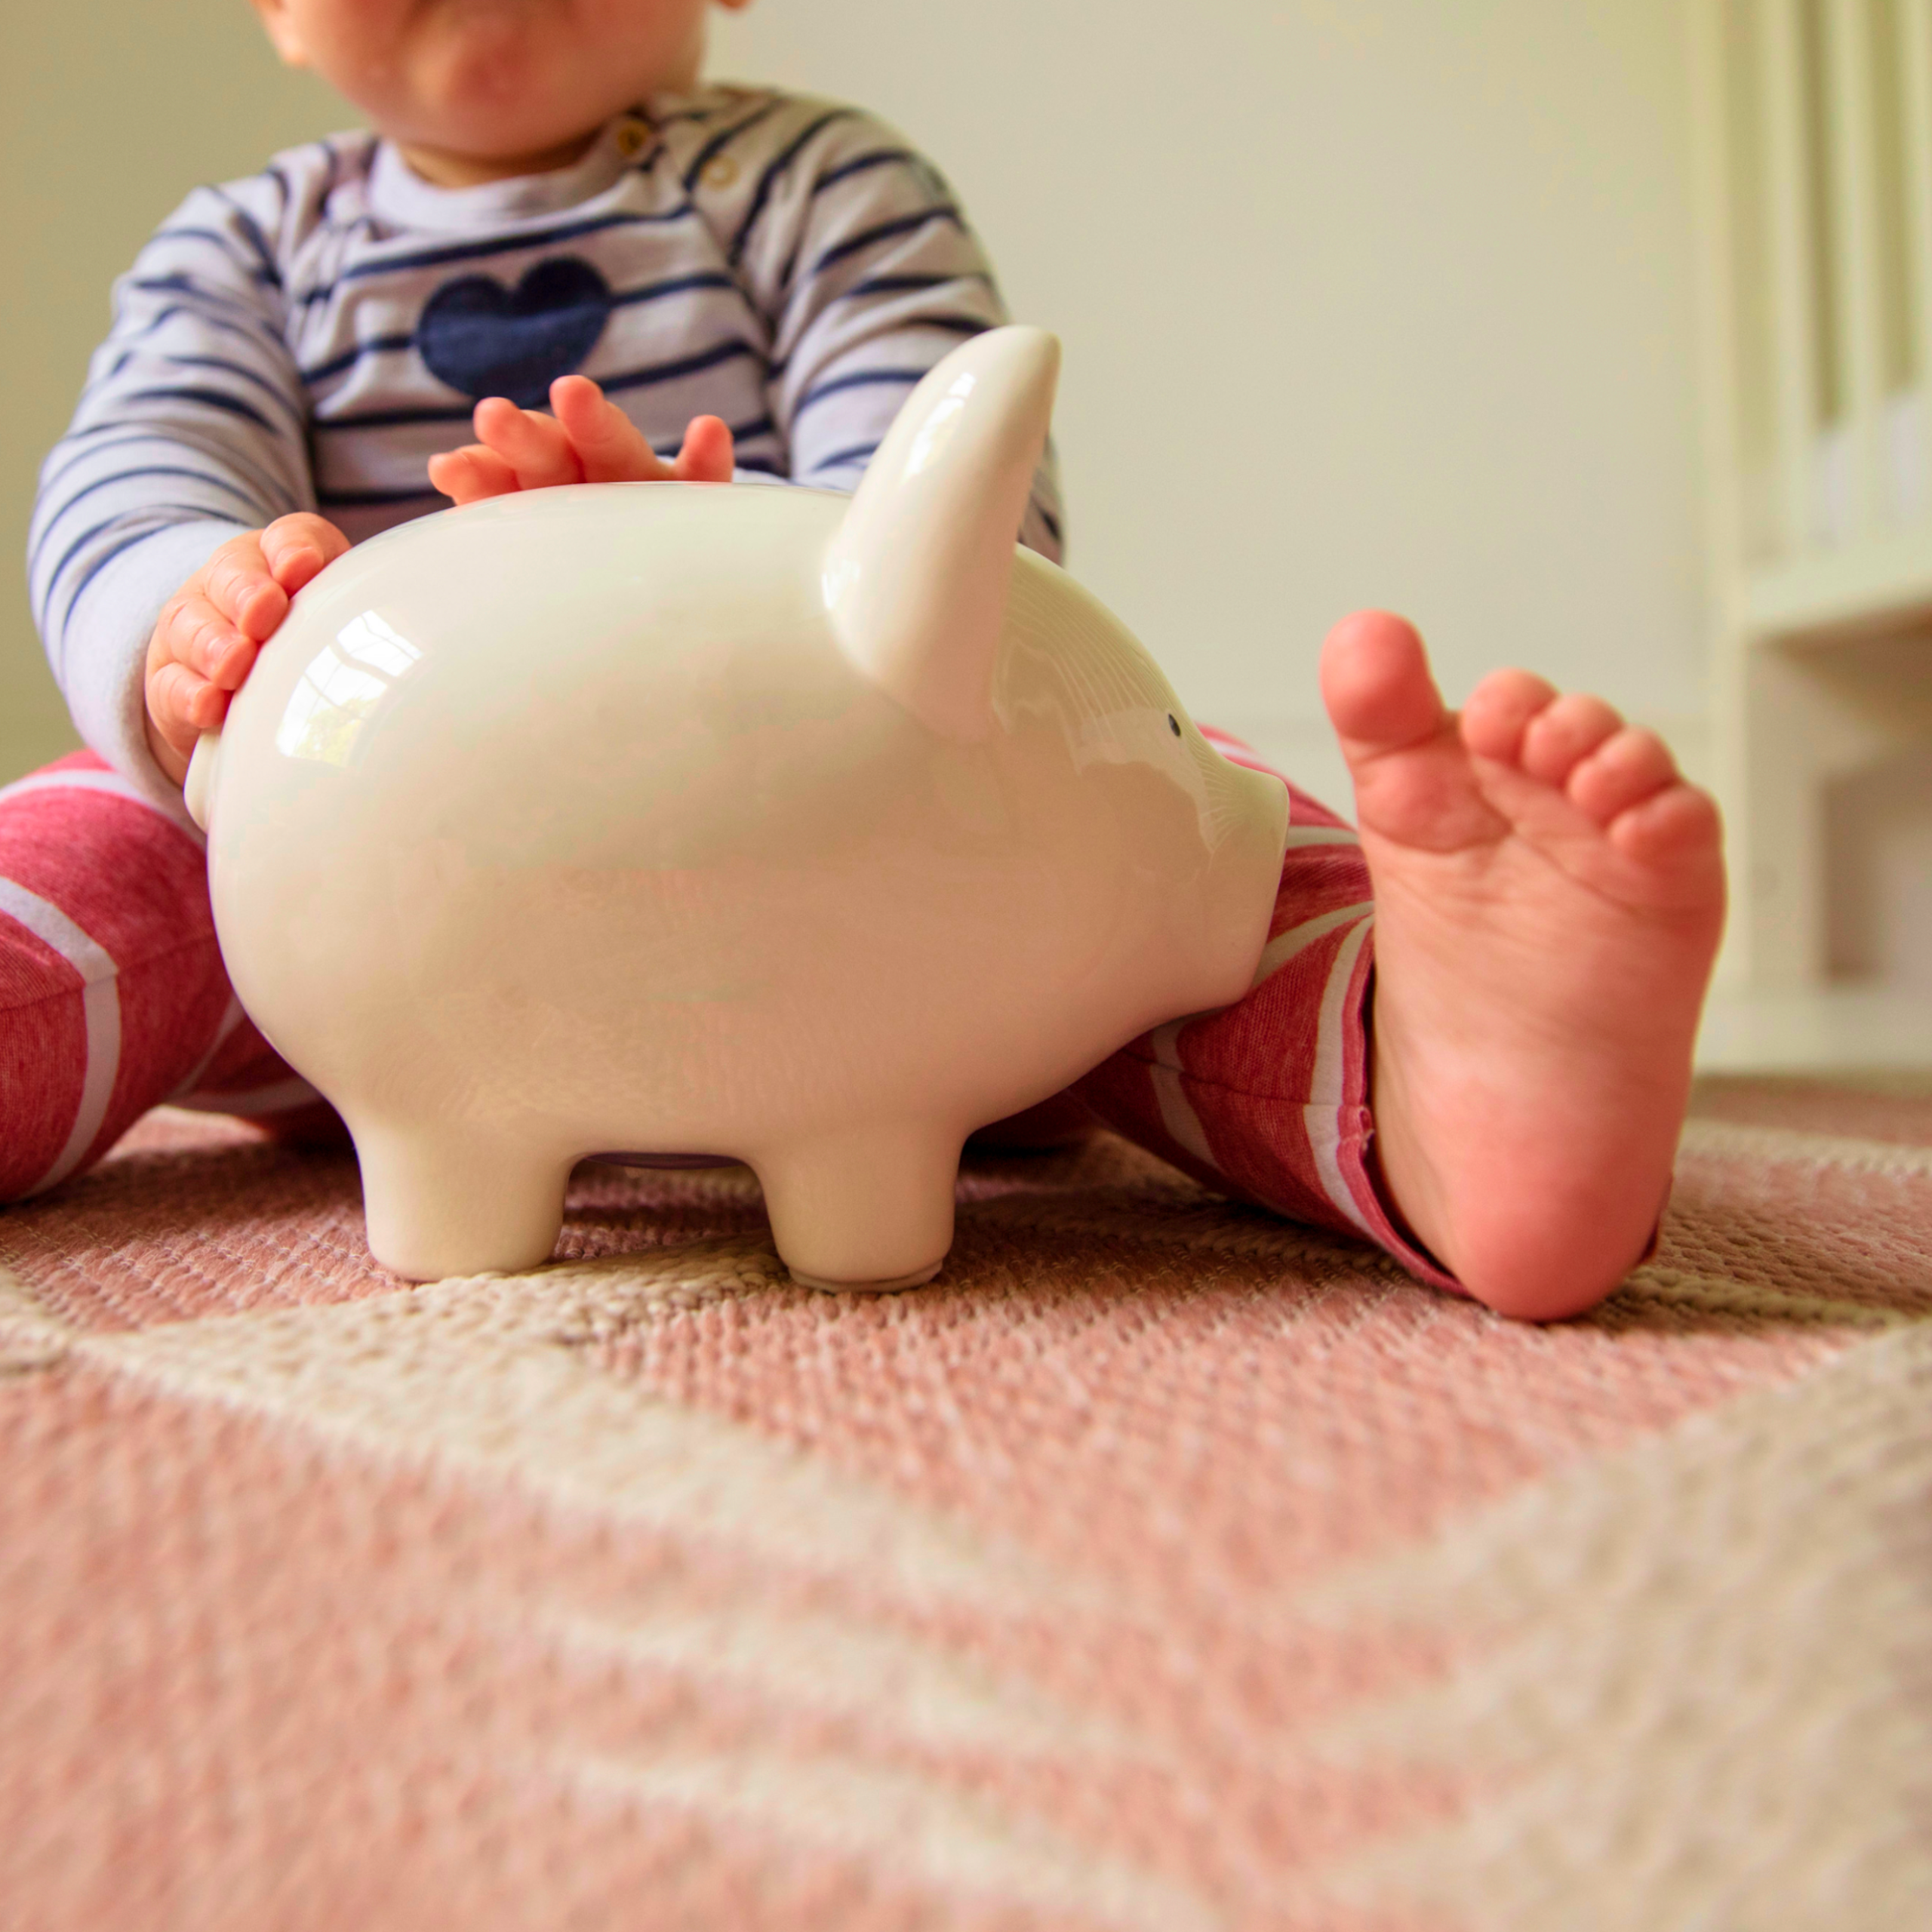 Baby with piggy bank